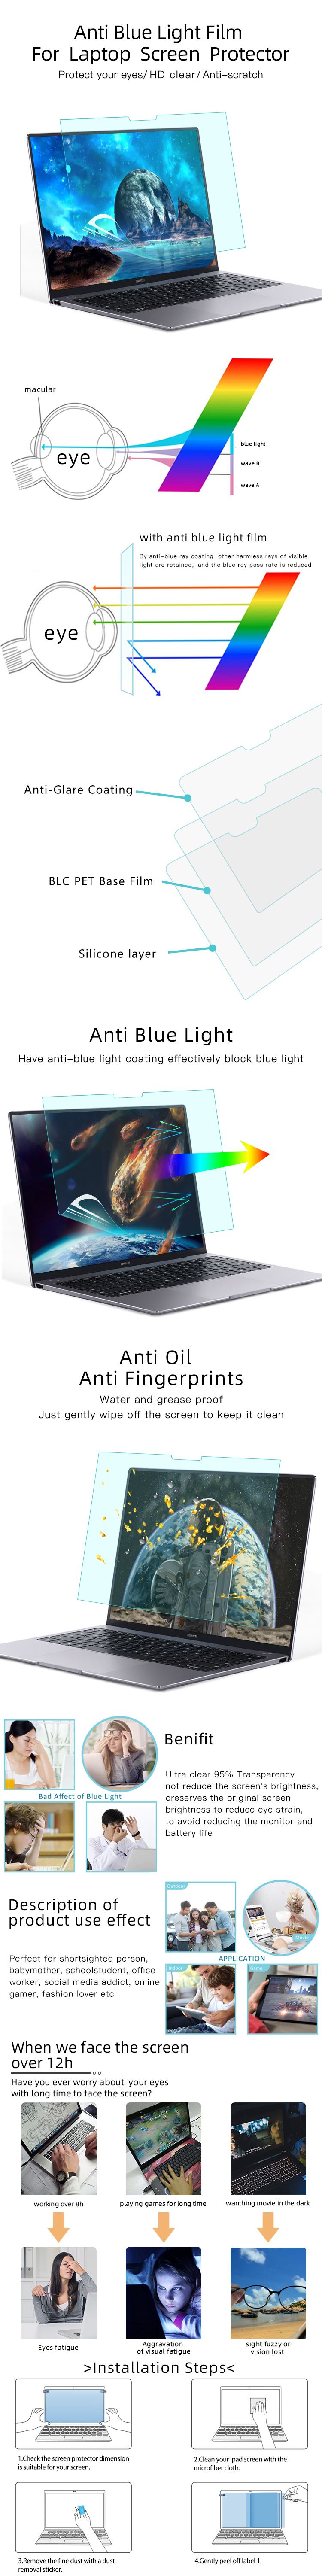 Anti-blue light film  Full Coverage Screen Protector For laptop and computer 17.3inch 16:9